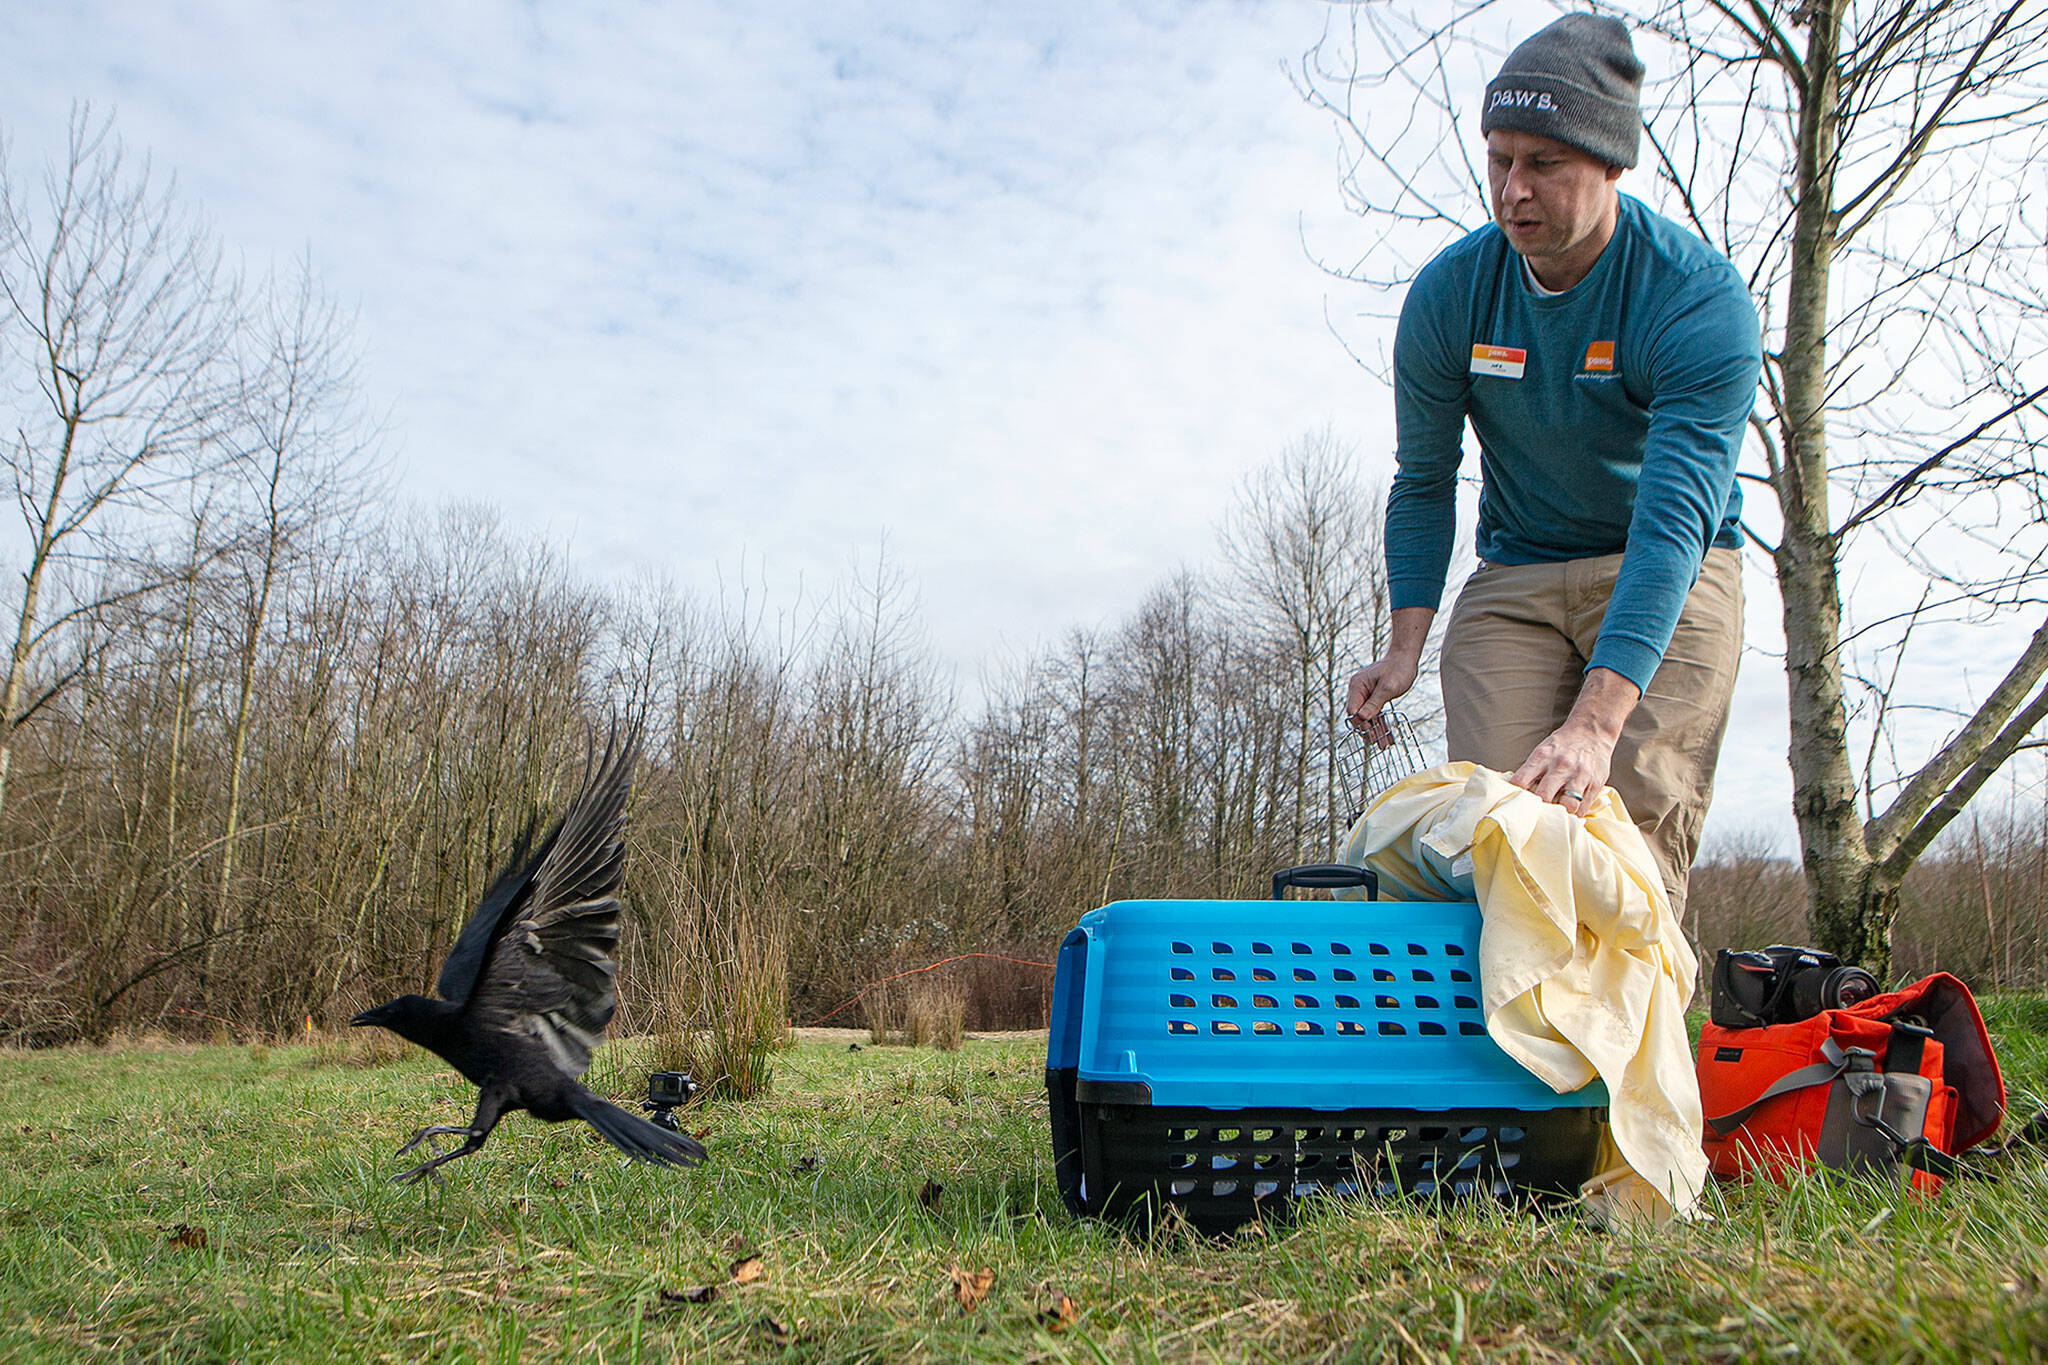 Jeff Brown of PAWS releases “crow 20220004” into the wild Friday at the UW Bothell campus after its rehabilitation for an injured wing. The crow immediately flew into a tree and began calling out to other birds in the area. (Ryan Berry / The Herald)